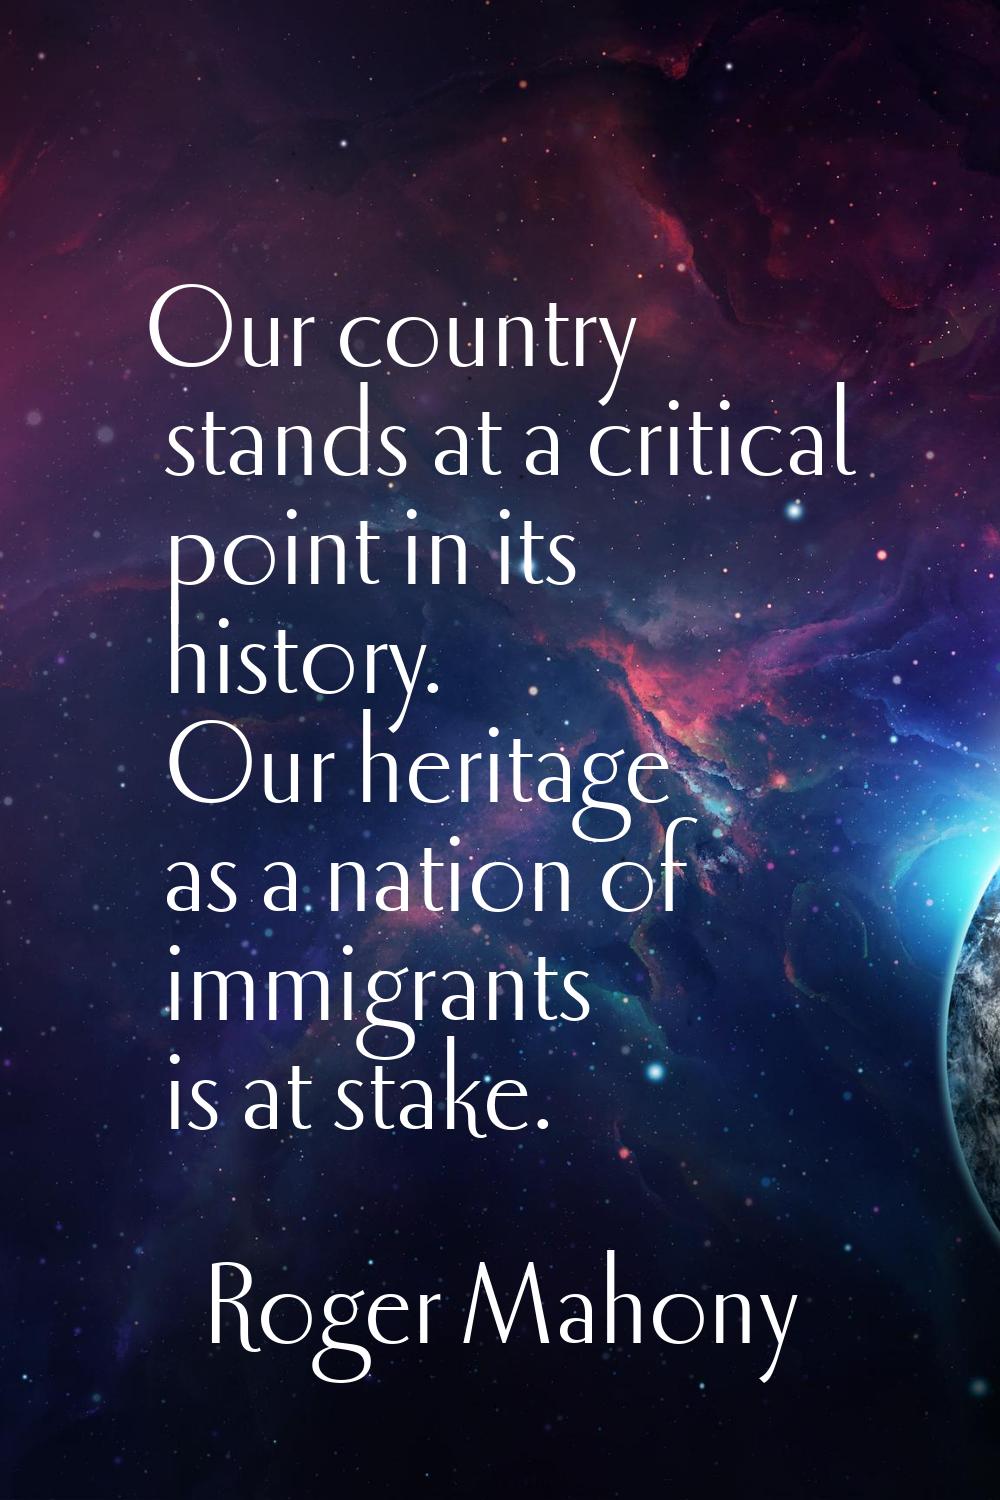 Our country stands at a critical point in its history. Our heritage as a nation of immigrants is at